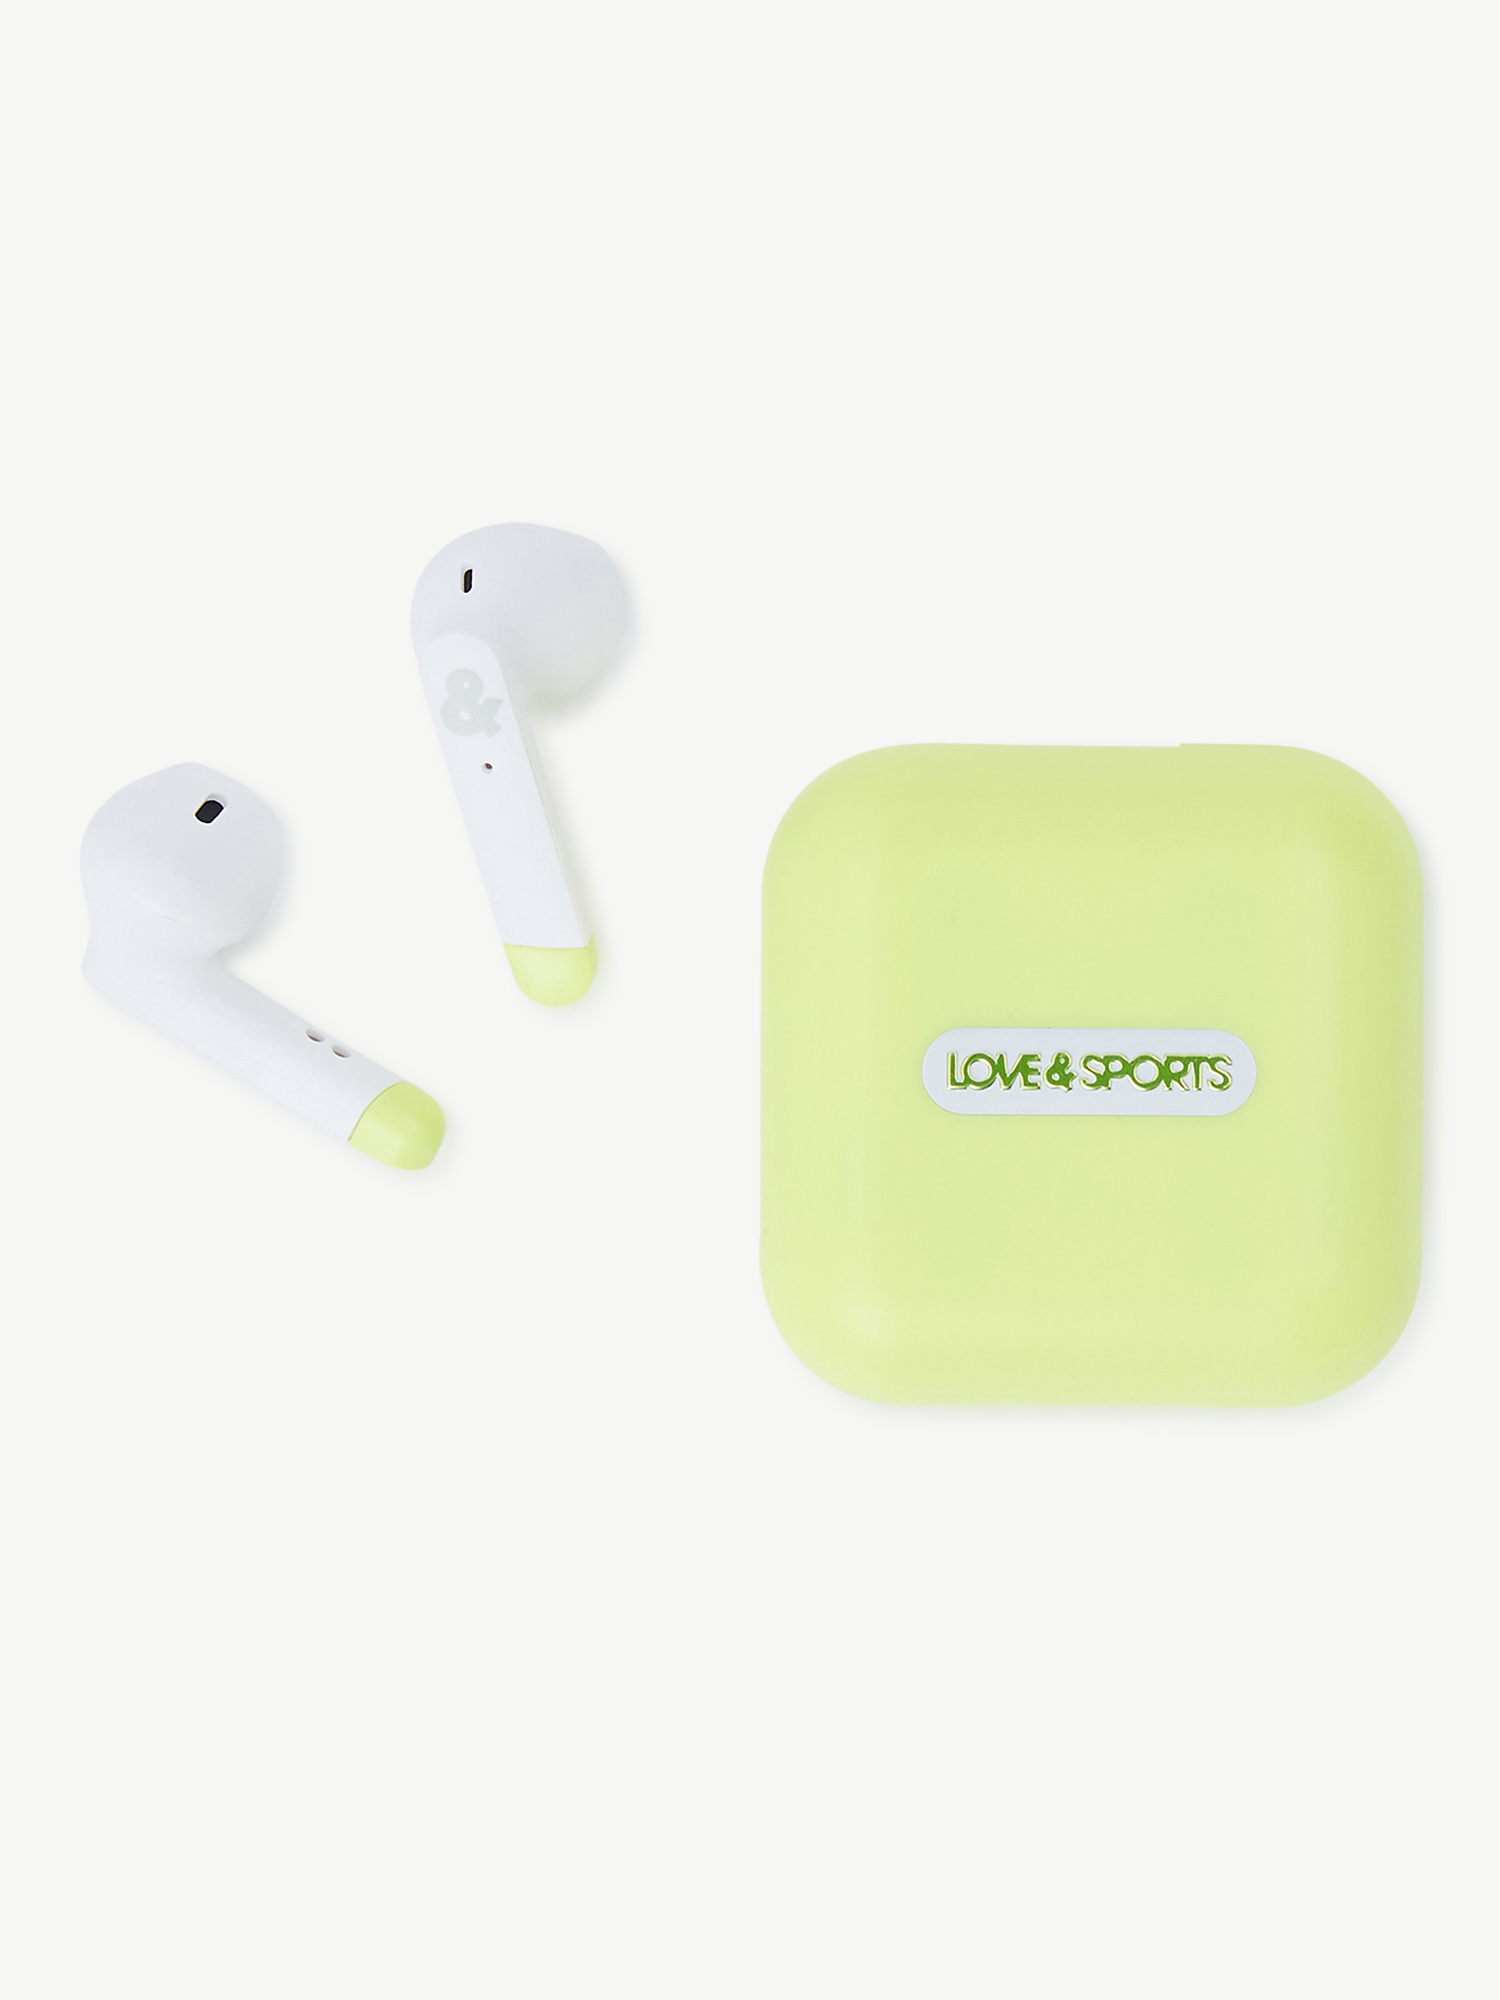 Love & Sports Bluetooth Wireless Earbuds and Charging Case, Neon Lime - image 1 of 5